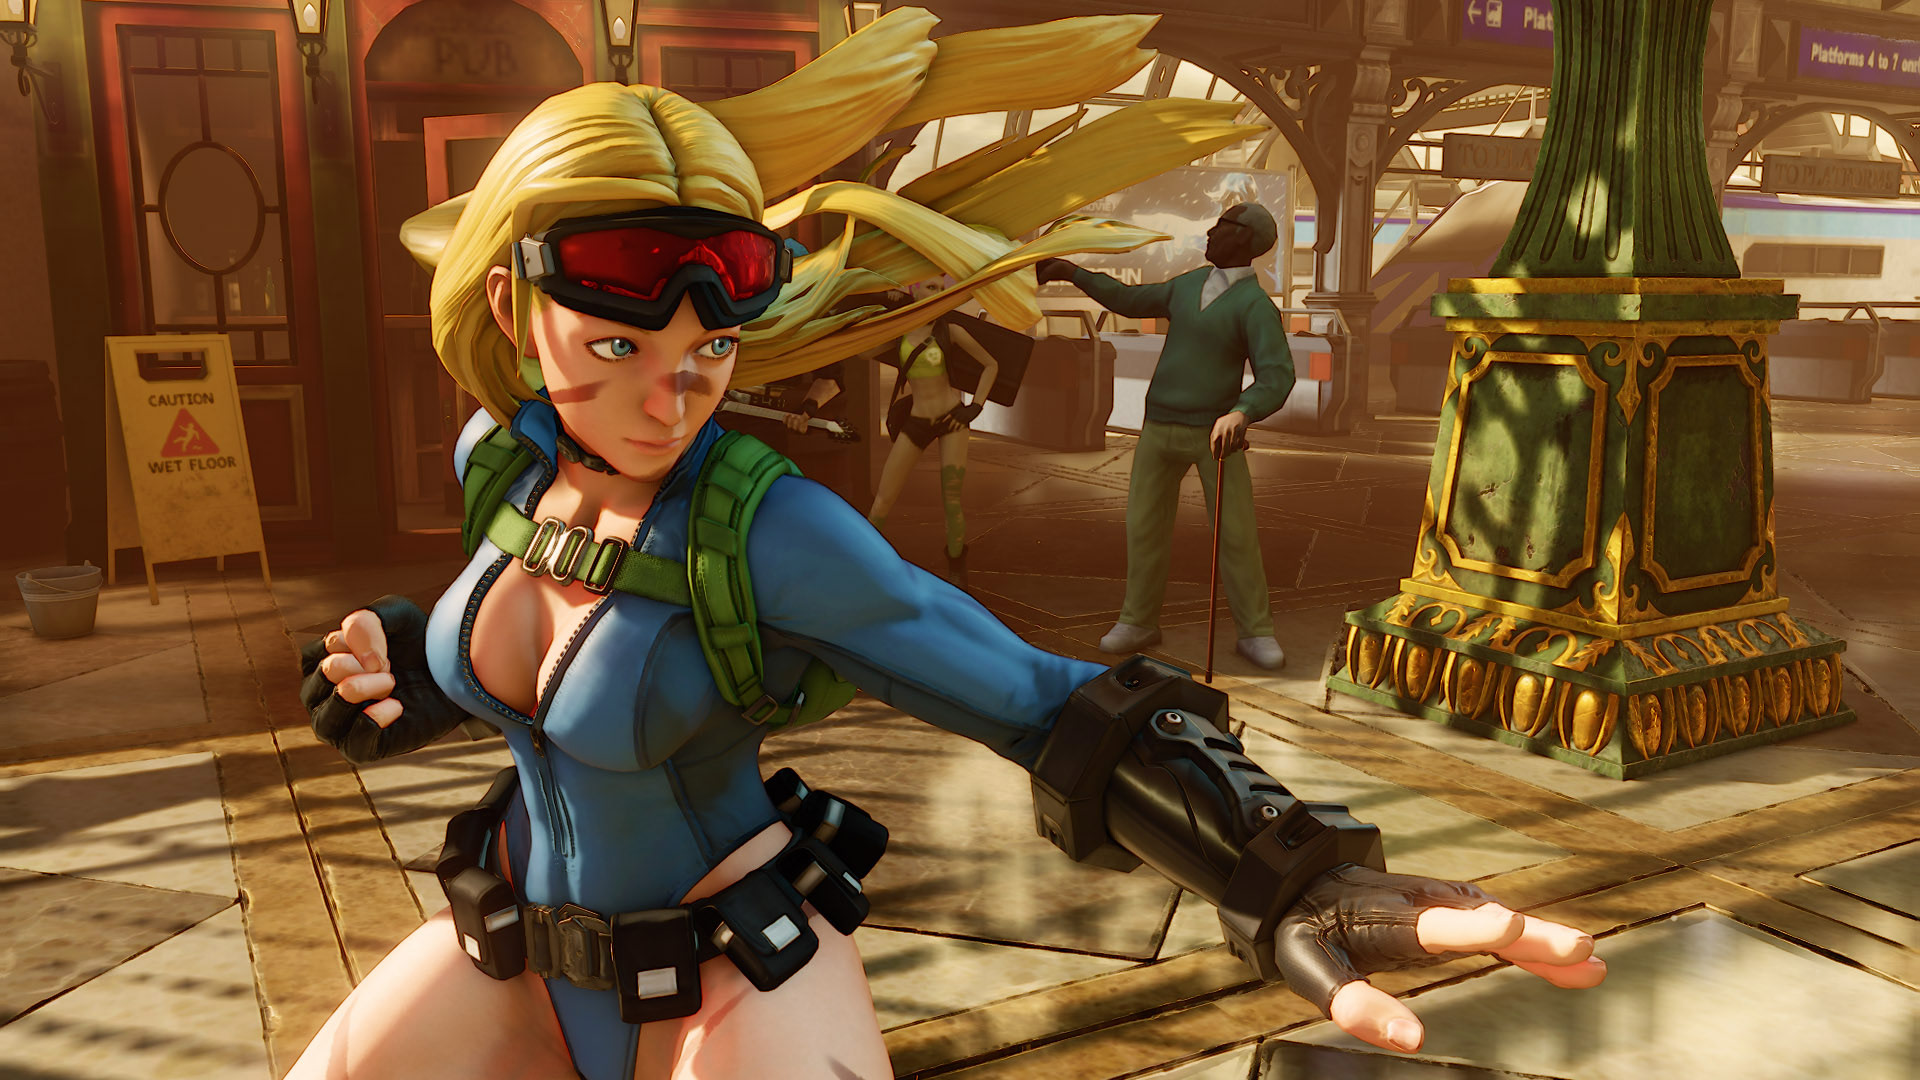 Super Street Fighter IV - CAMMY Ultra Combos 